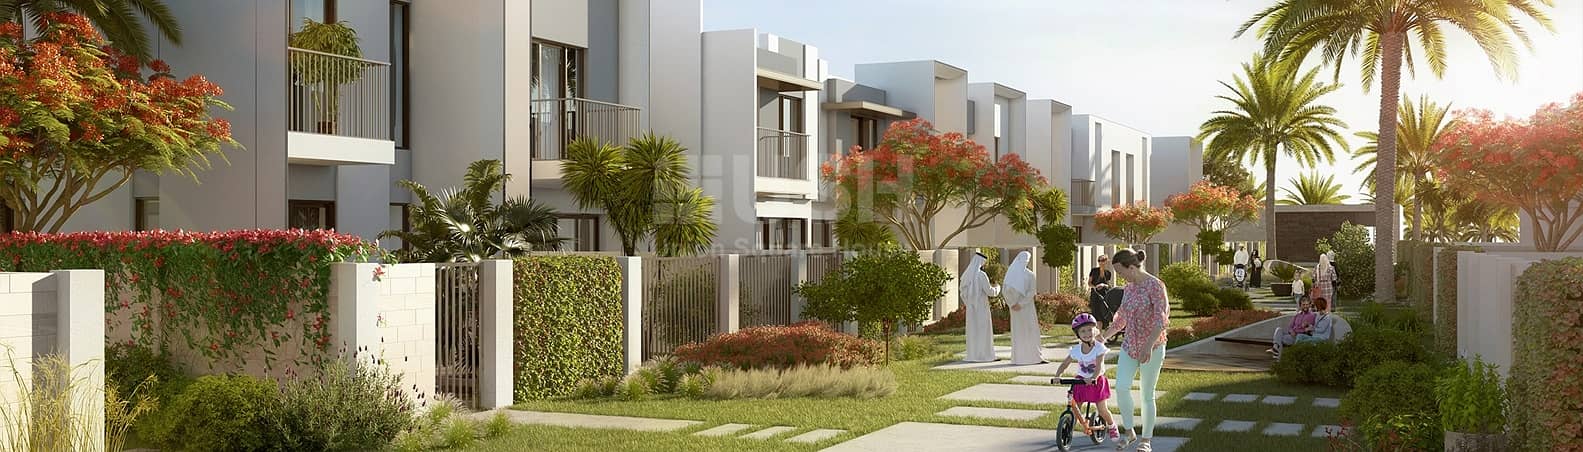 20 cheapest townhouse / 2%DLD Waiver / 3years post handover payment plan